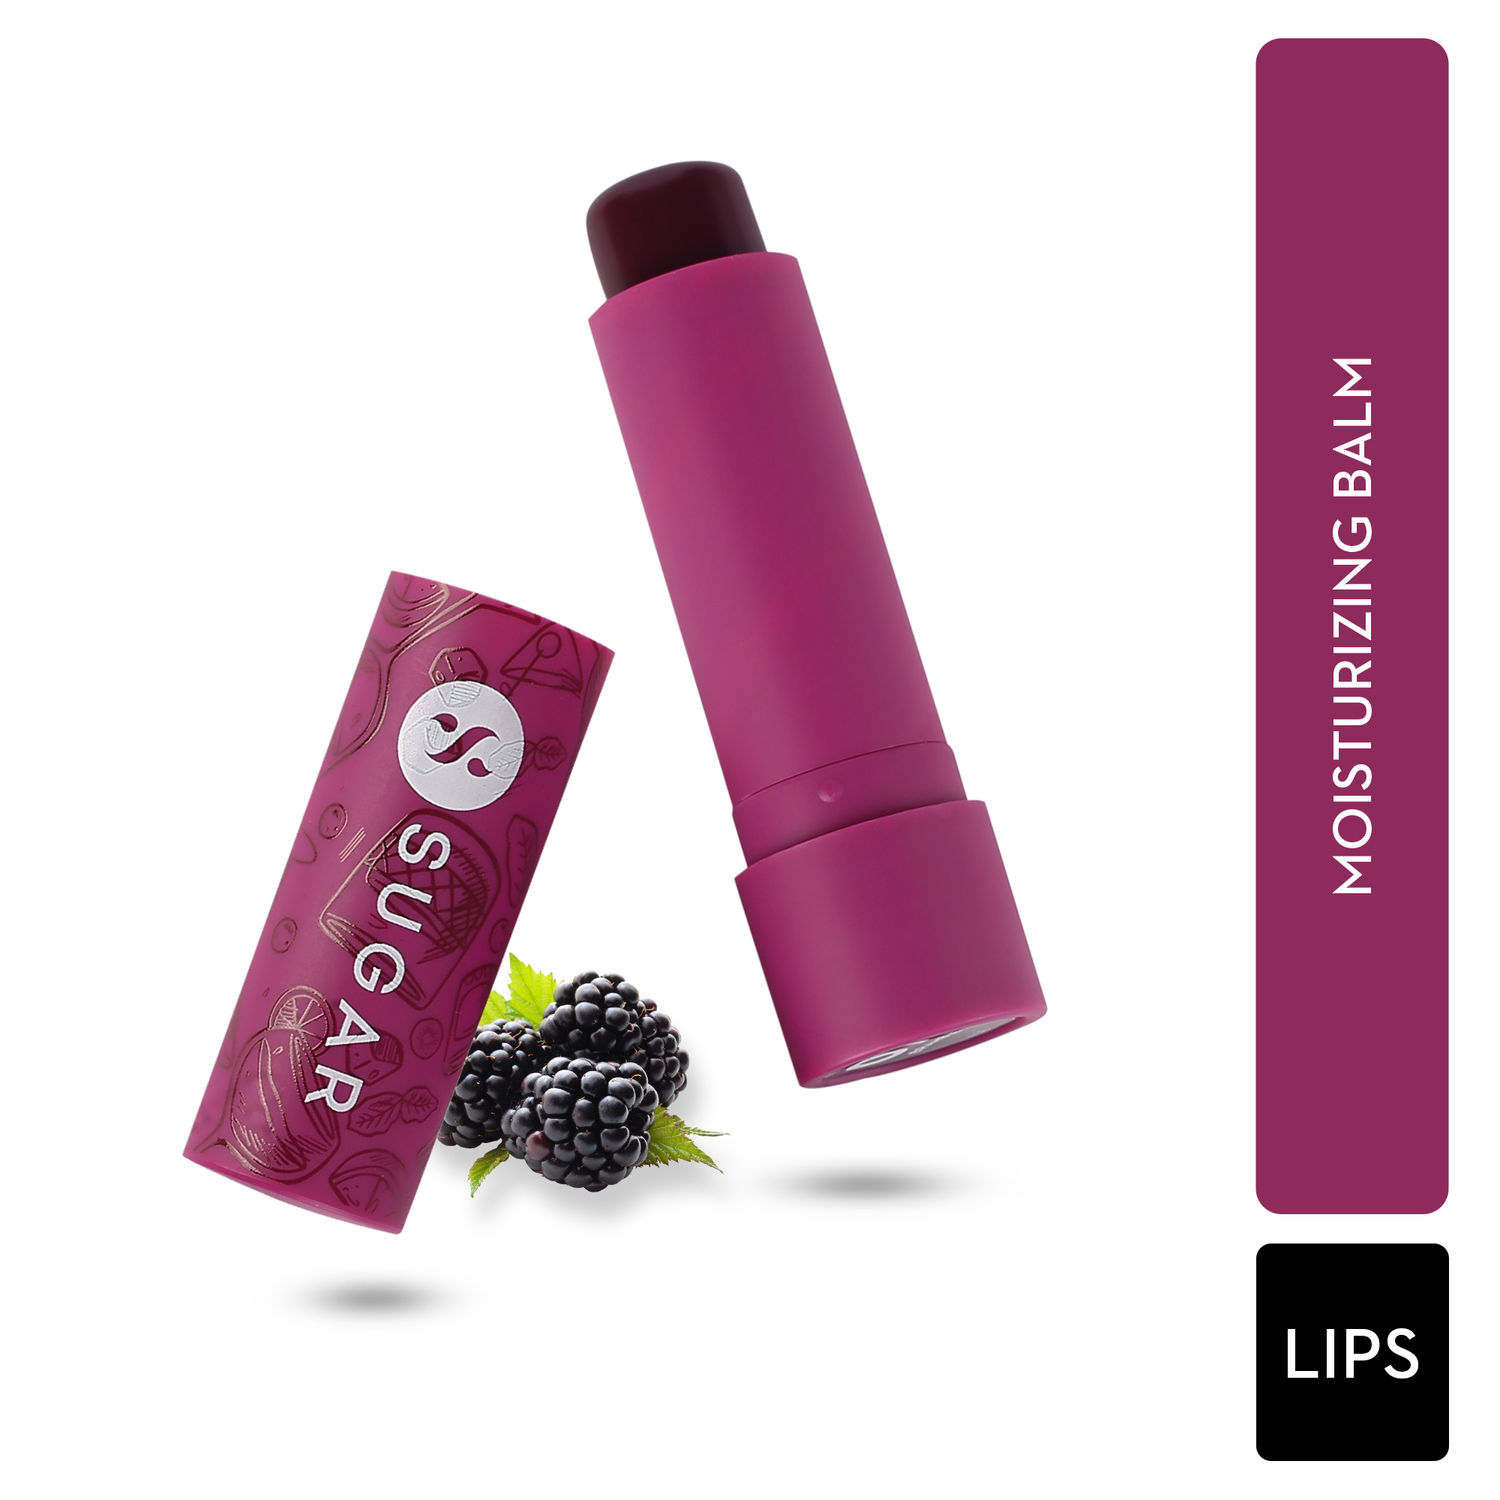 Buy SUGAR Cosmetics - Tipsy Lips - Moisturizing Balm - 07 Bramble - 4.5 gms - Lip Moisturizer for Dry and Chapped Lips, Enriched with Shea Butter and Jojoba Oil - Purplle